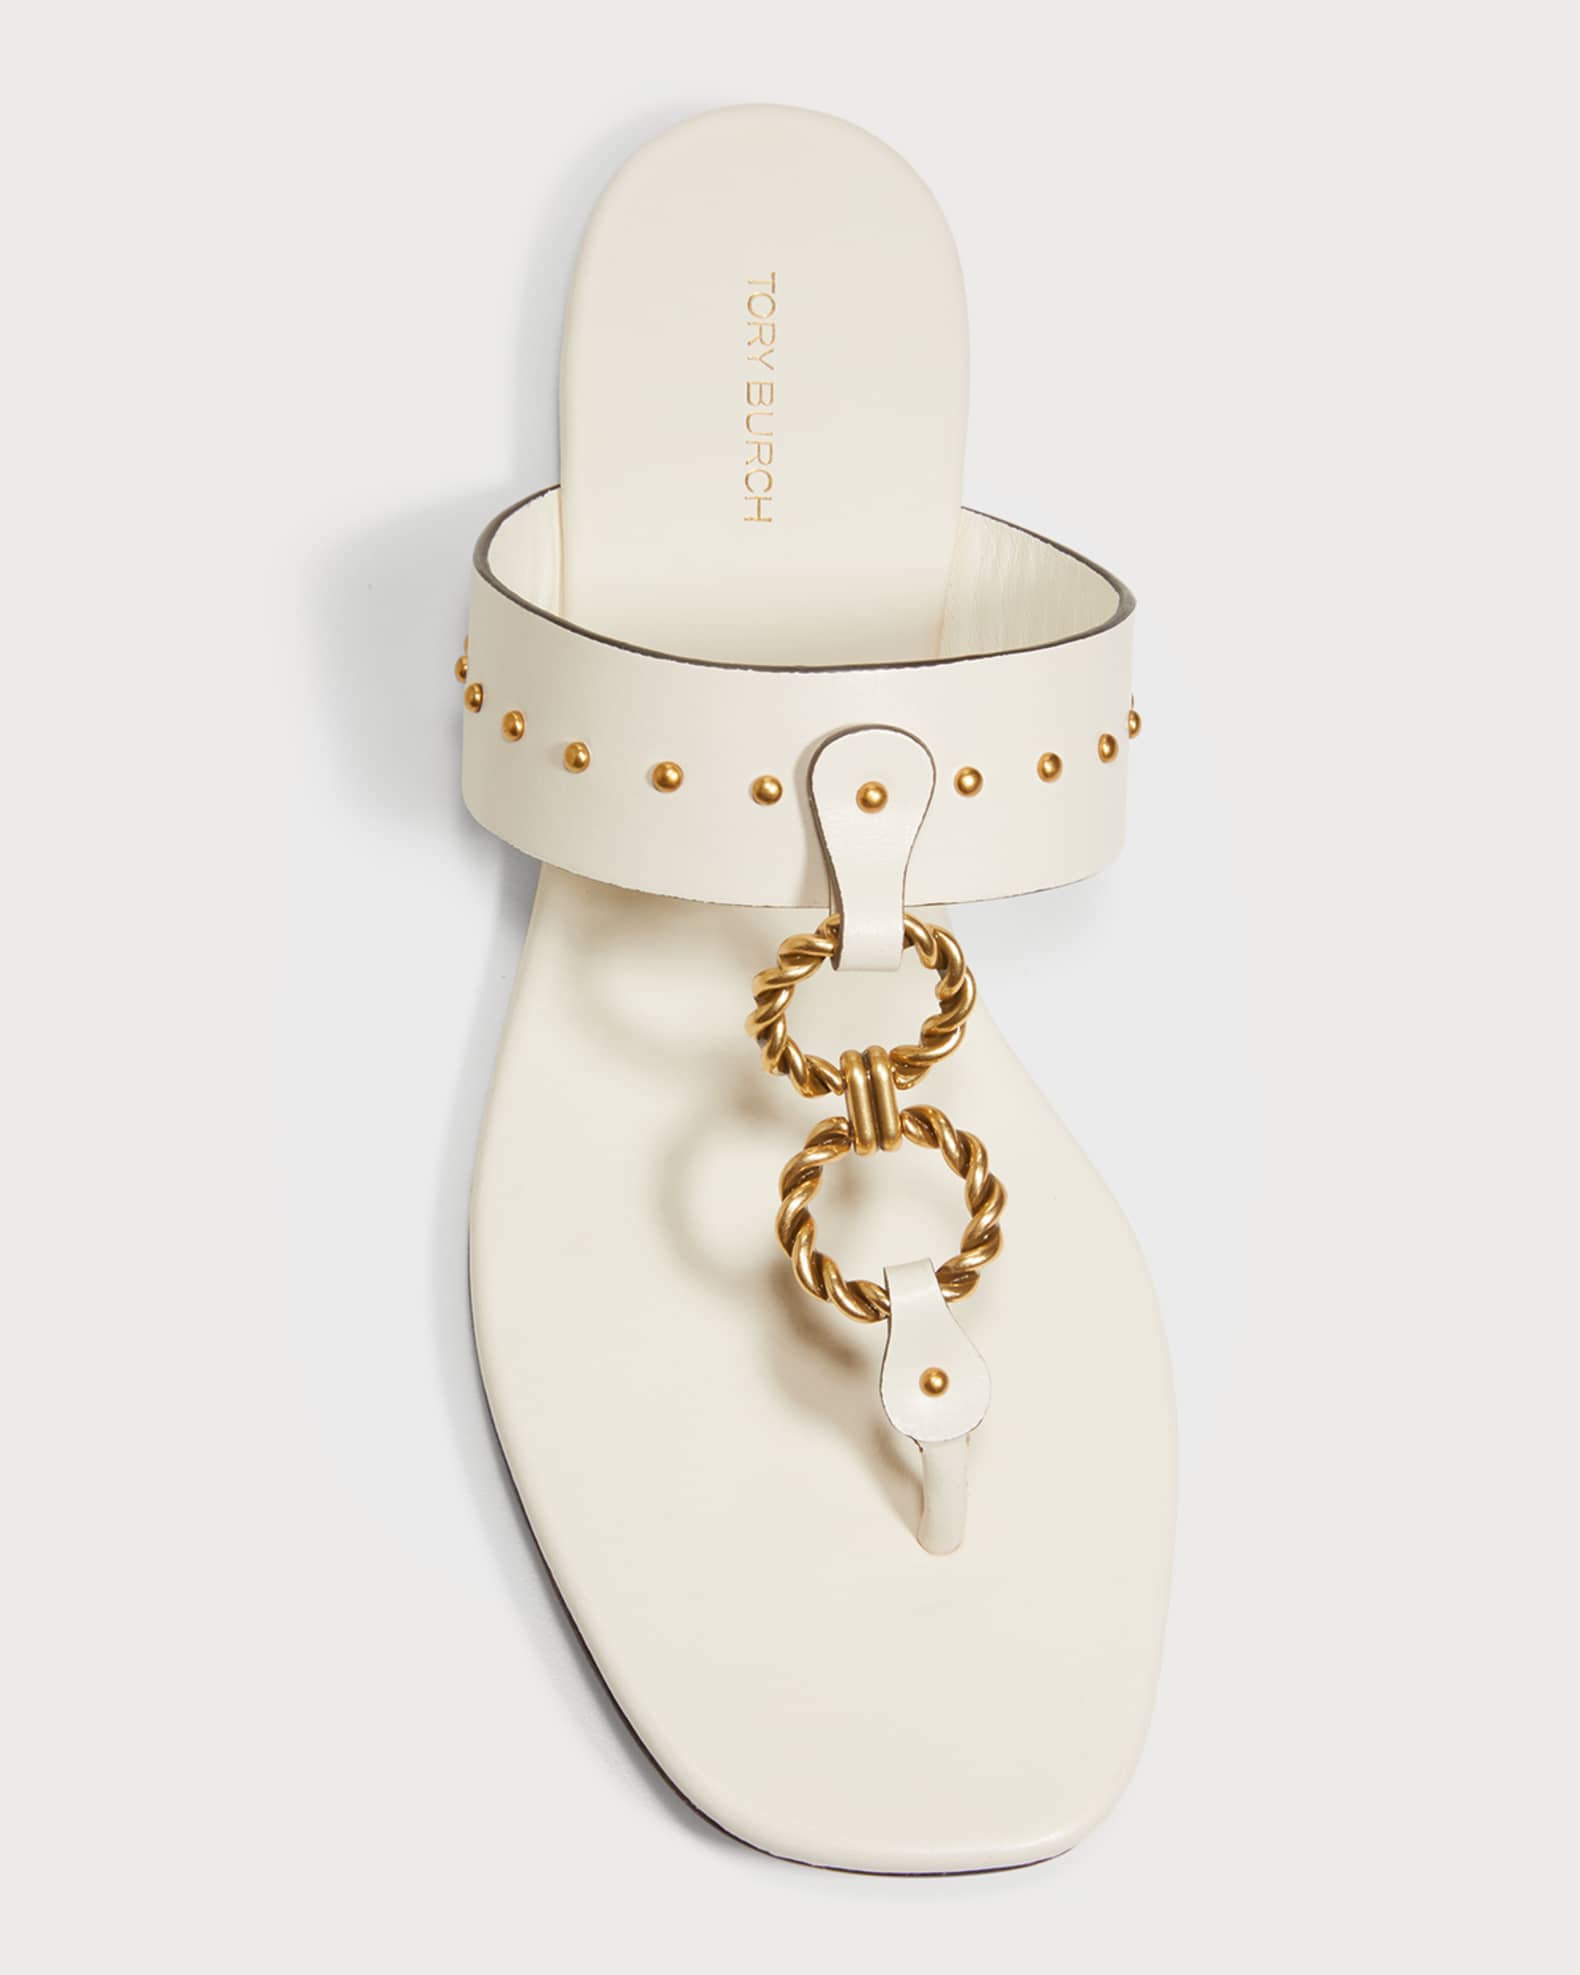 Tory Burch Chain T-Strap Leather Thong Sandals | Neiman Marcus